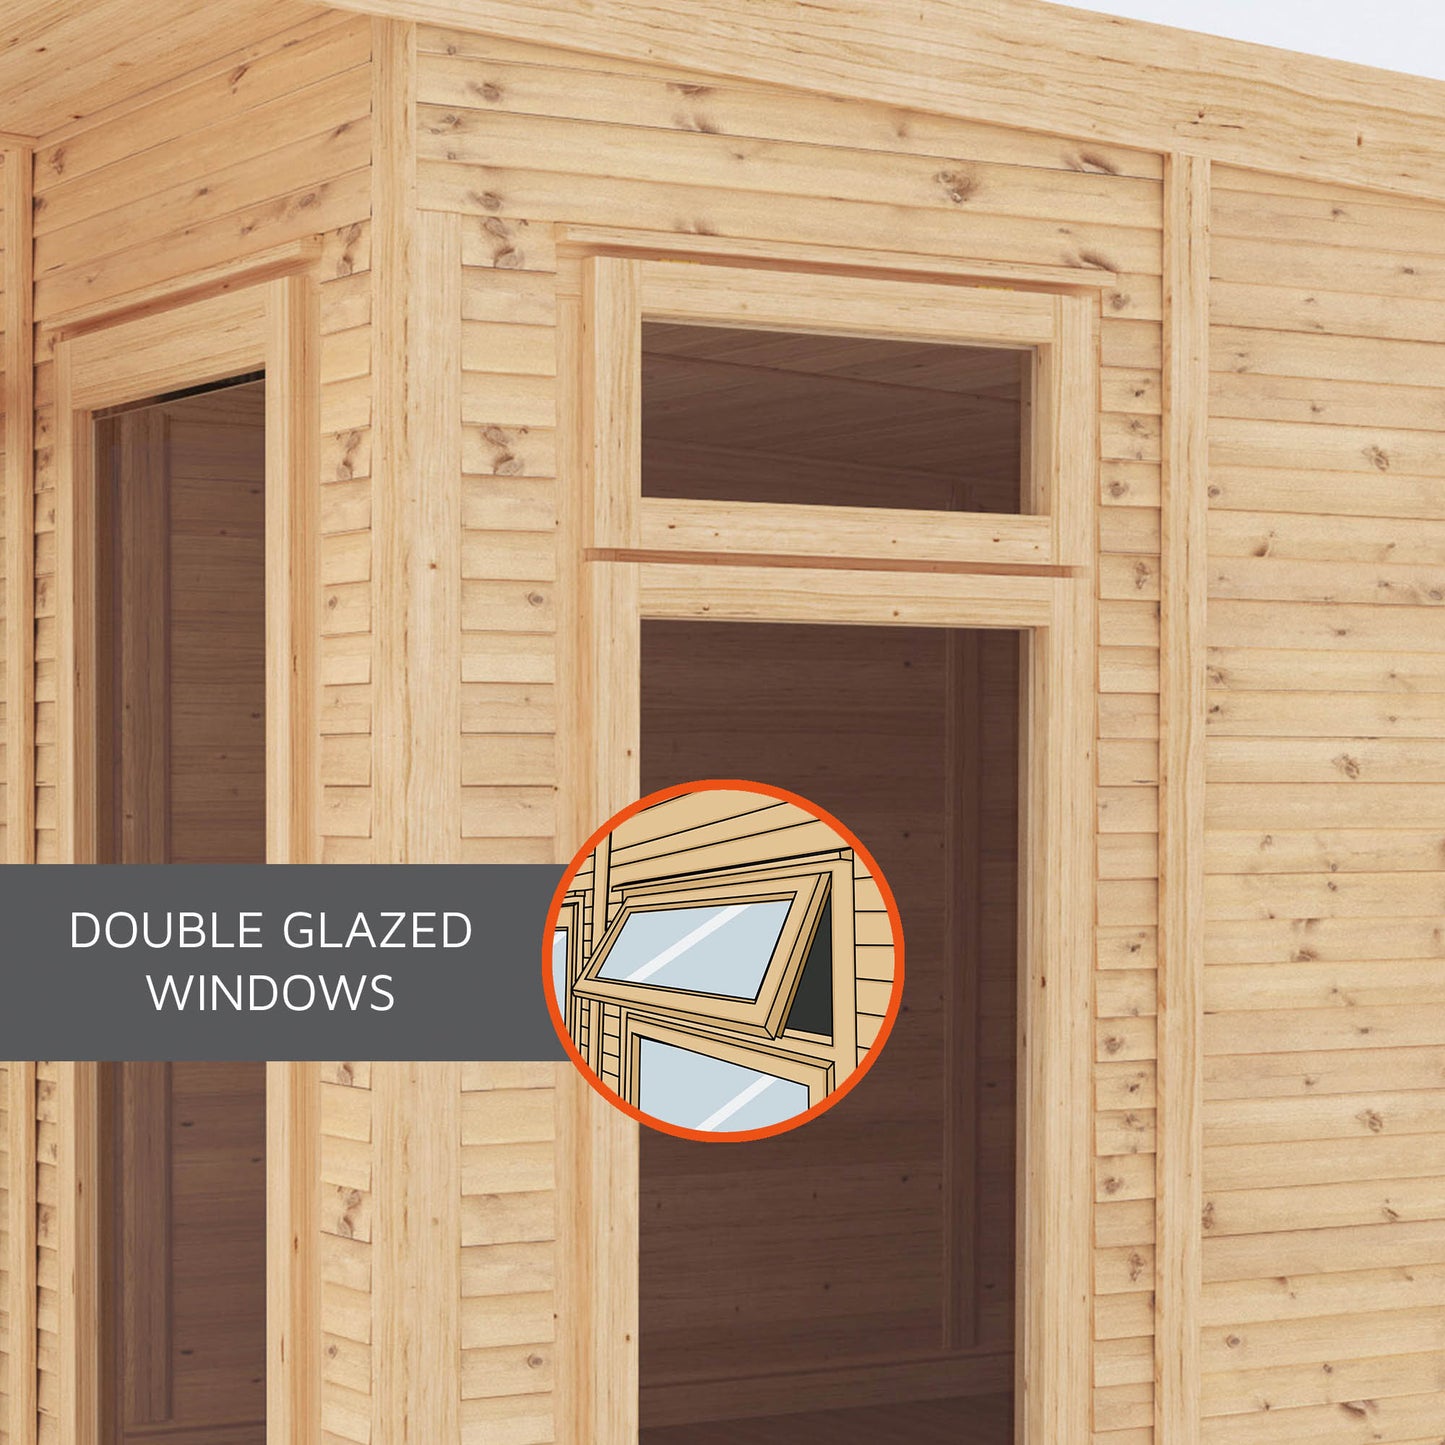 The Creswell 6m x 4m Premium Insulated Garden Room